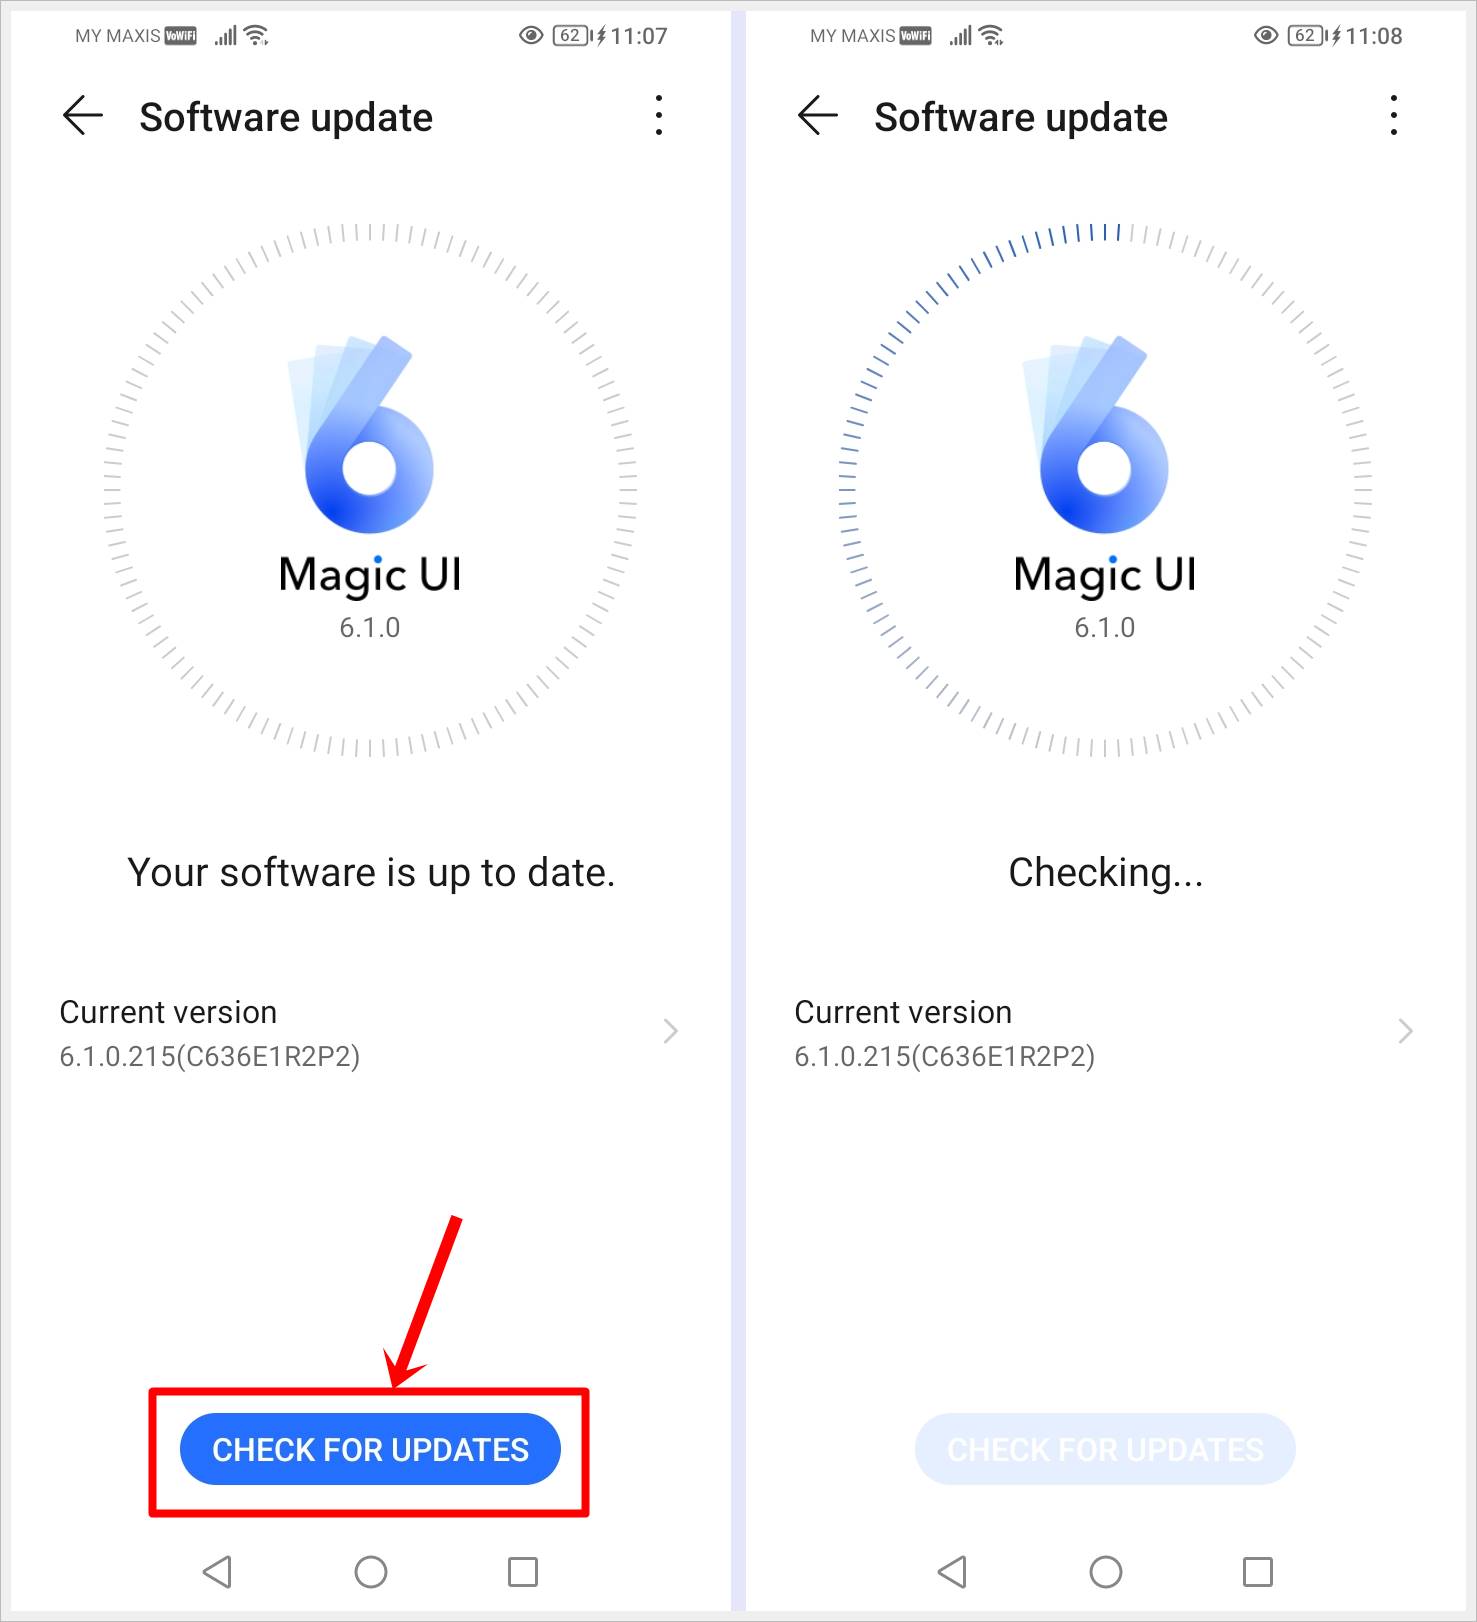 Update Android OS to Fix an Android Phone That Keeps Restarting: This image displays two screenshots of the Android phone's 'Software Update' page. In the first, the 'Check for Updates' button is highlighted. The second screenshot shows the progress of checking for any available software updates.